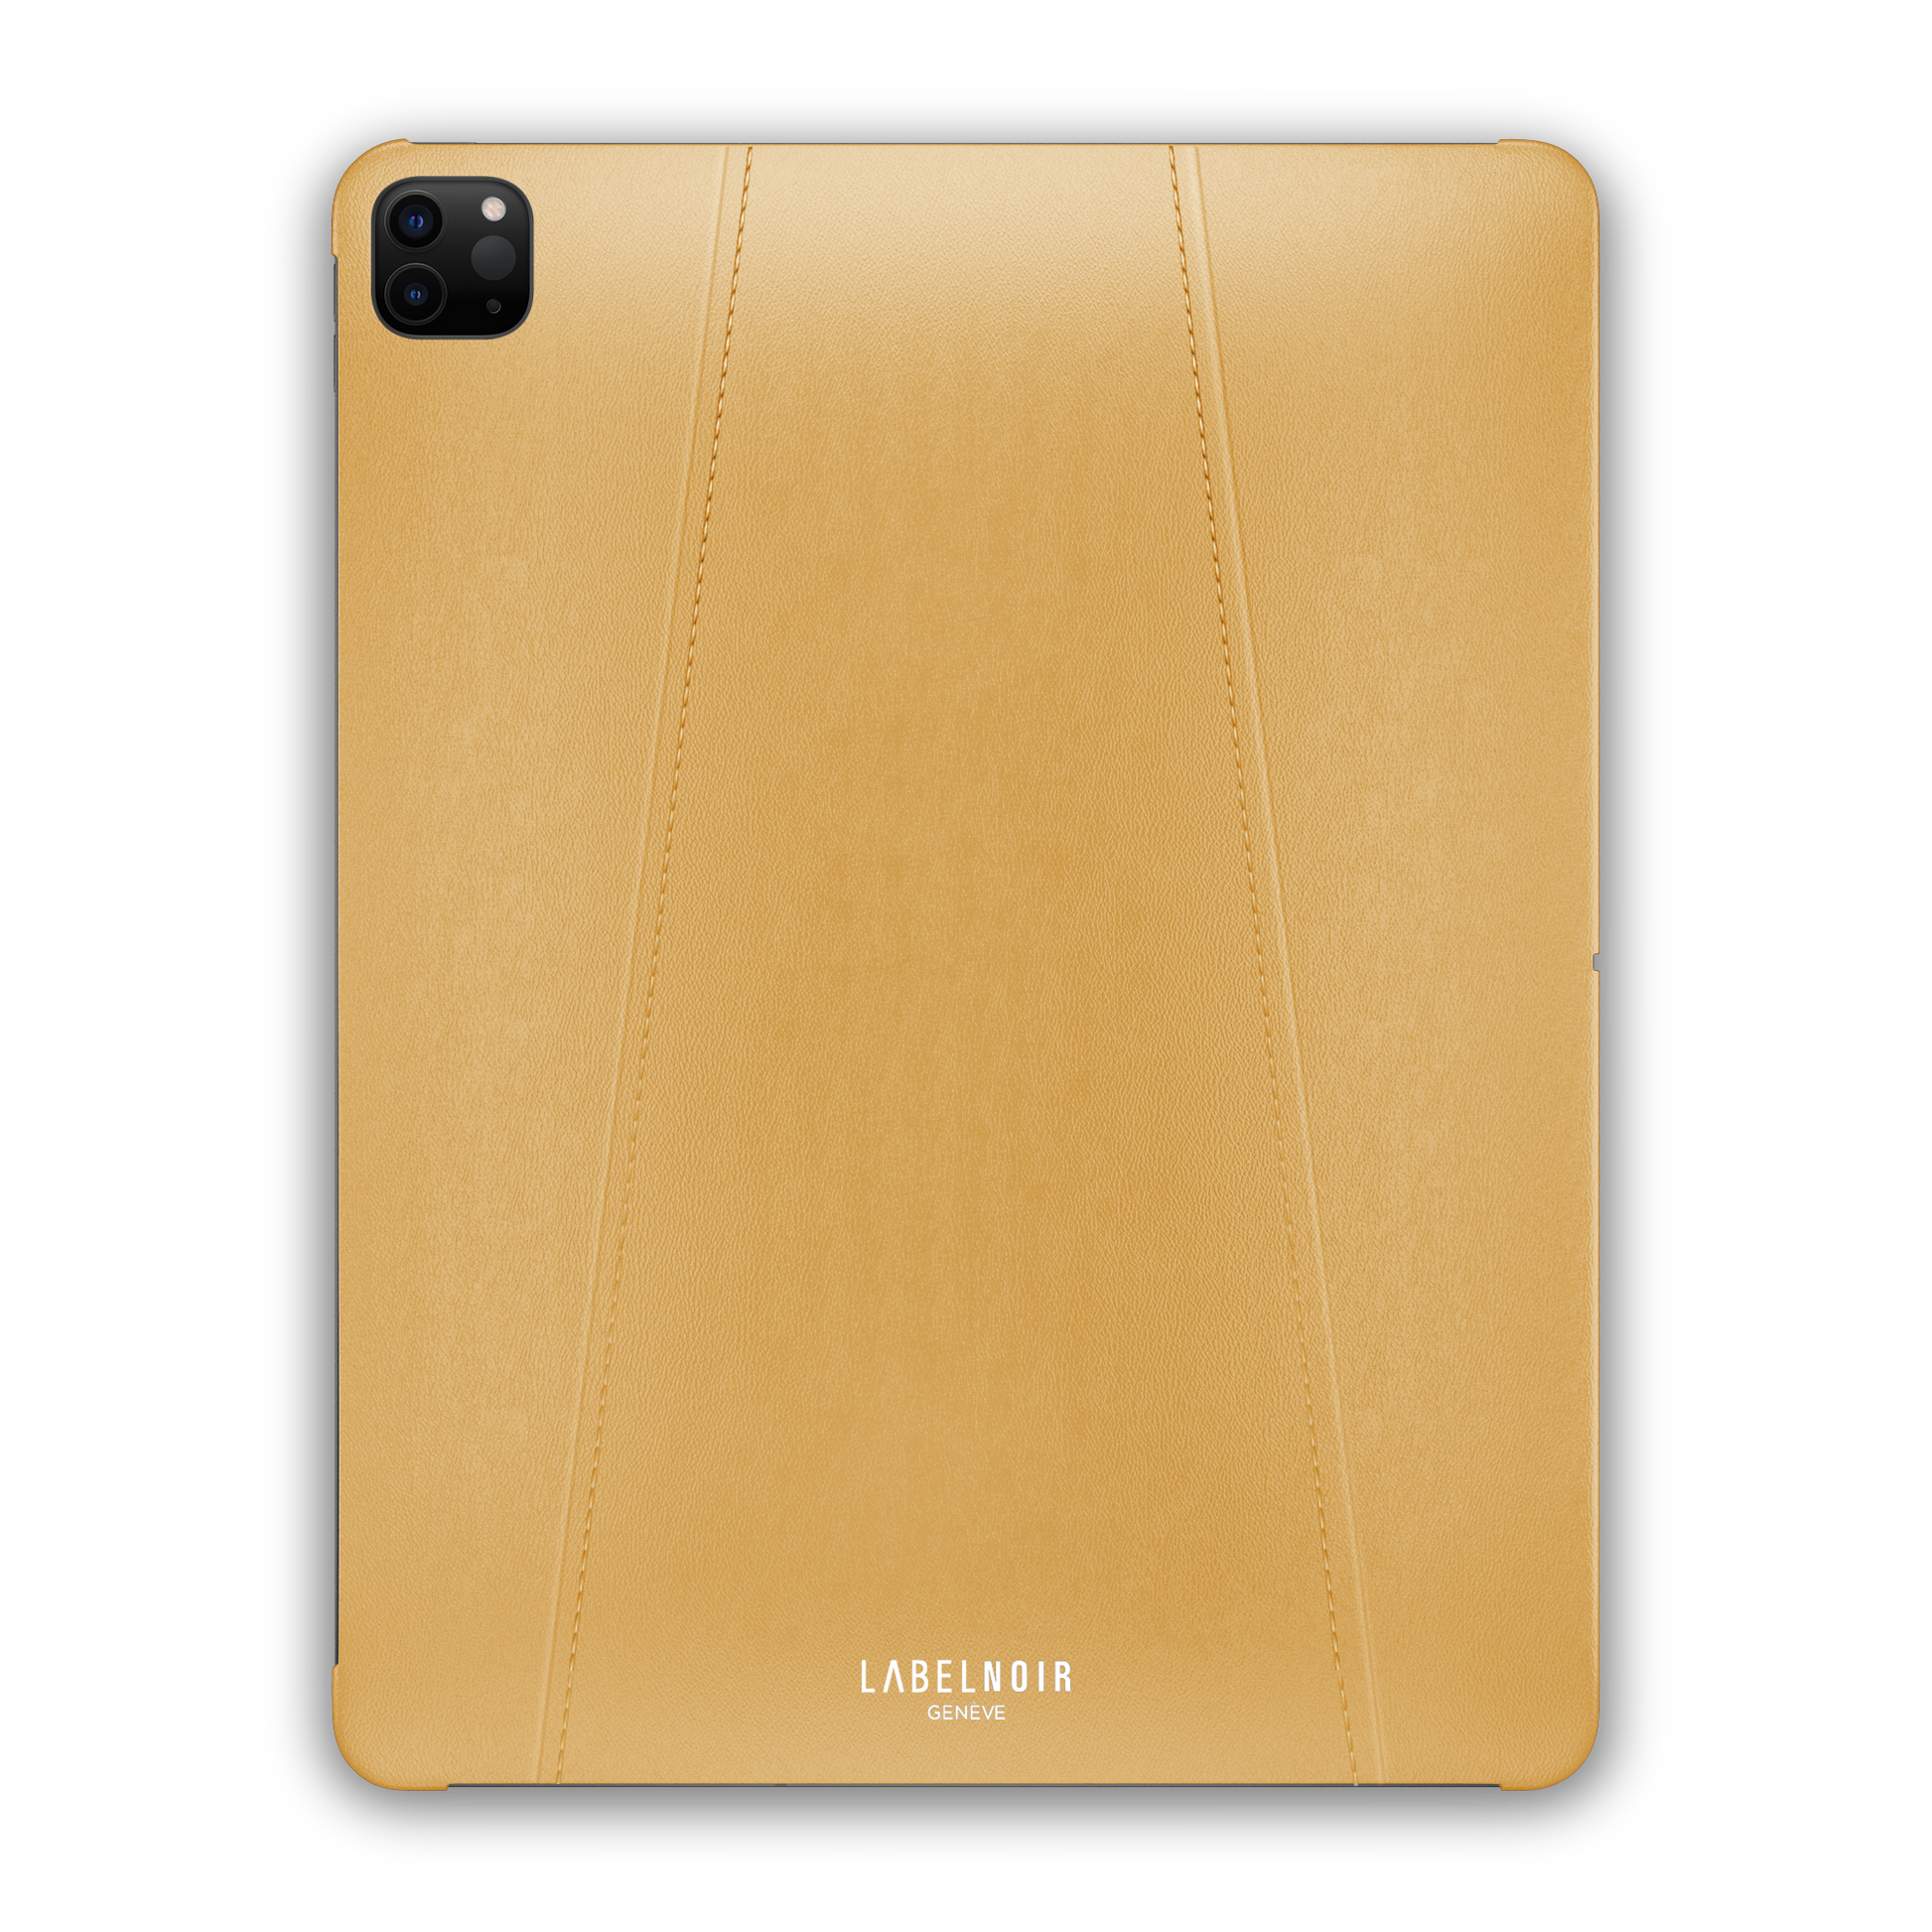 Ipad Pro (6th Gen) 12.9-inch Yellow Leather Case